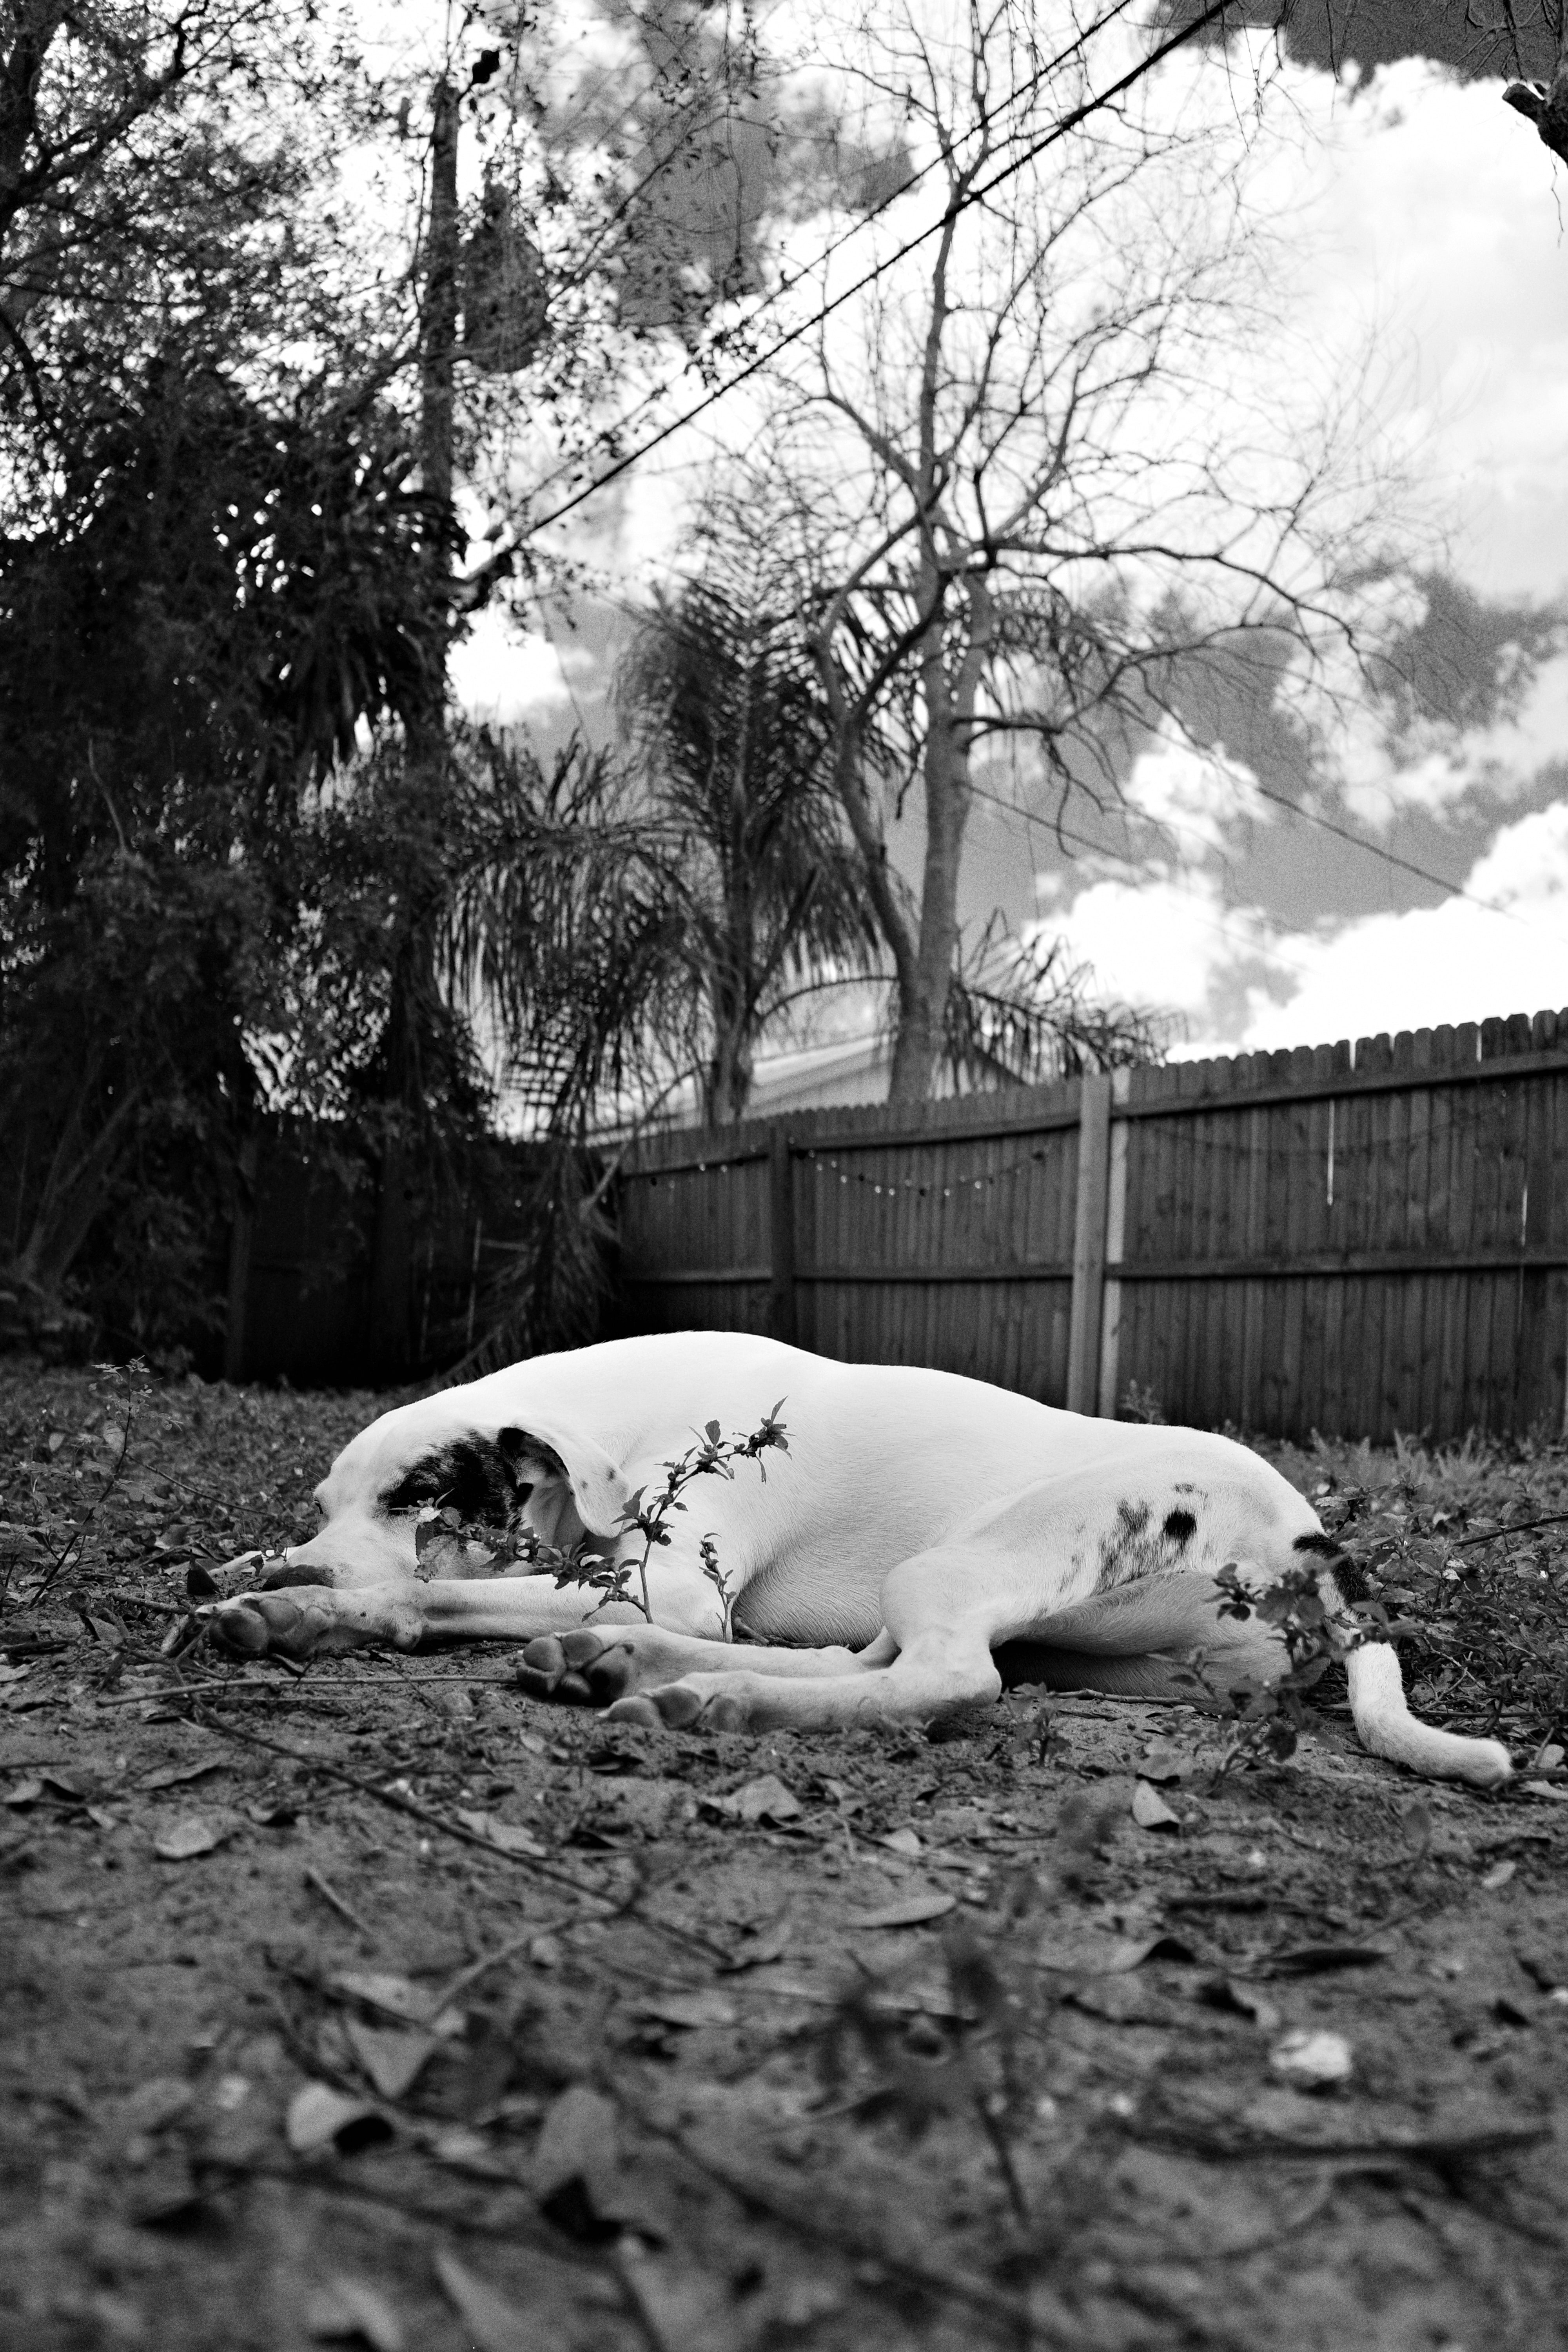 A dog in a yard, sleeping peacefully on a partly cloudy day. Monochrome.